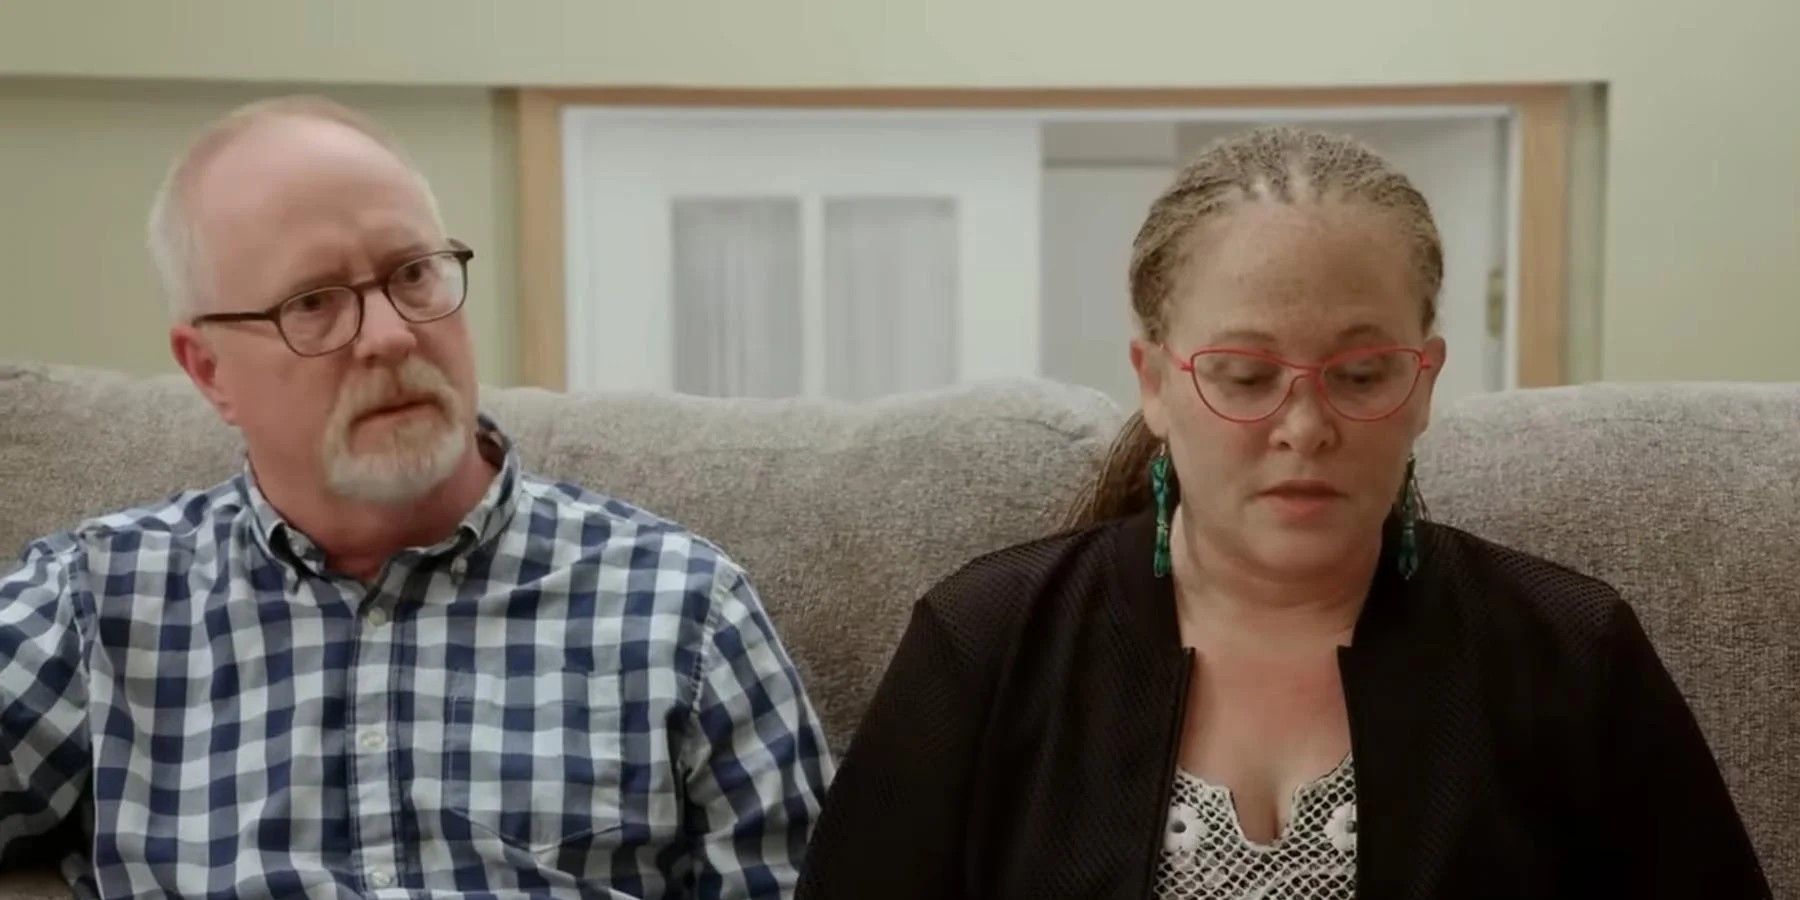 Jibri Bell’s parents, Mahala and Brian Bach, from 90 Day Fiancé.